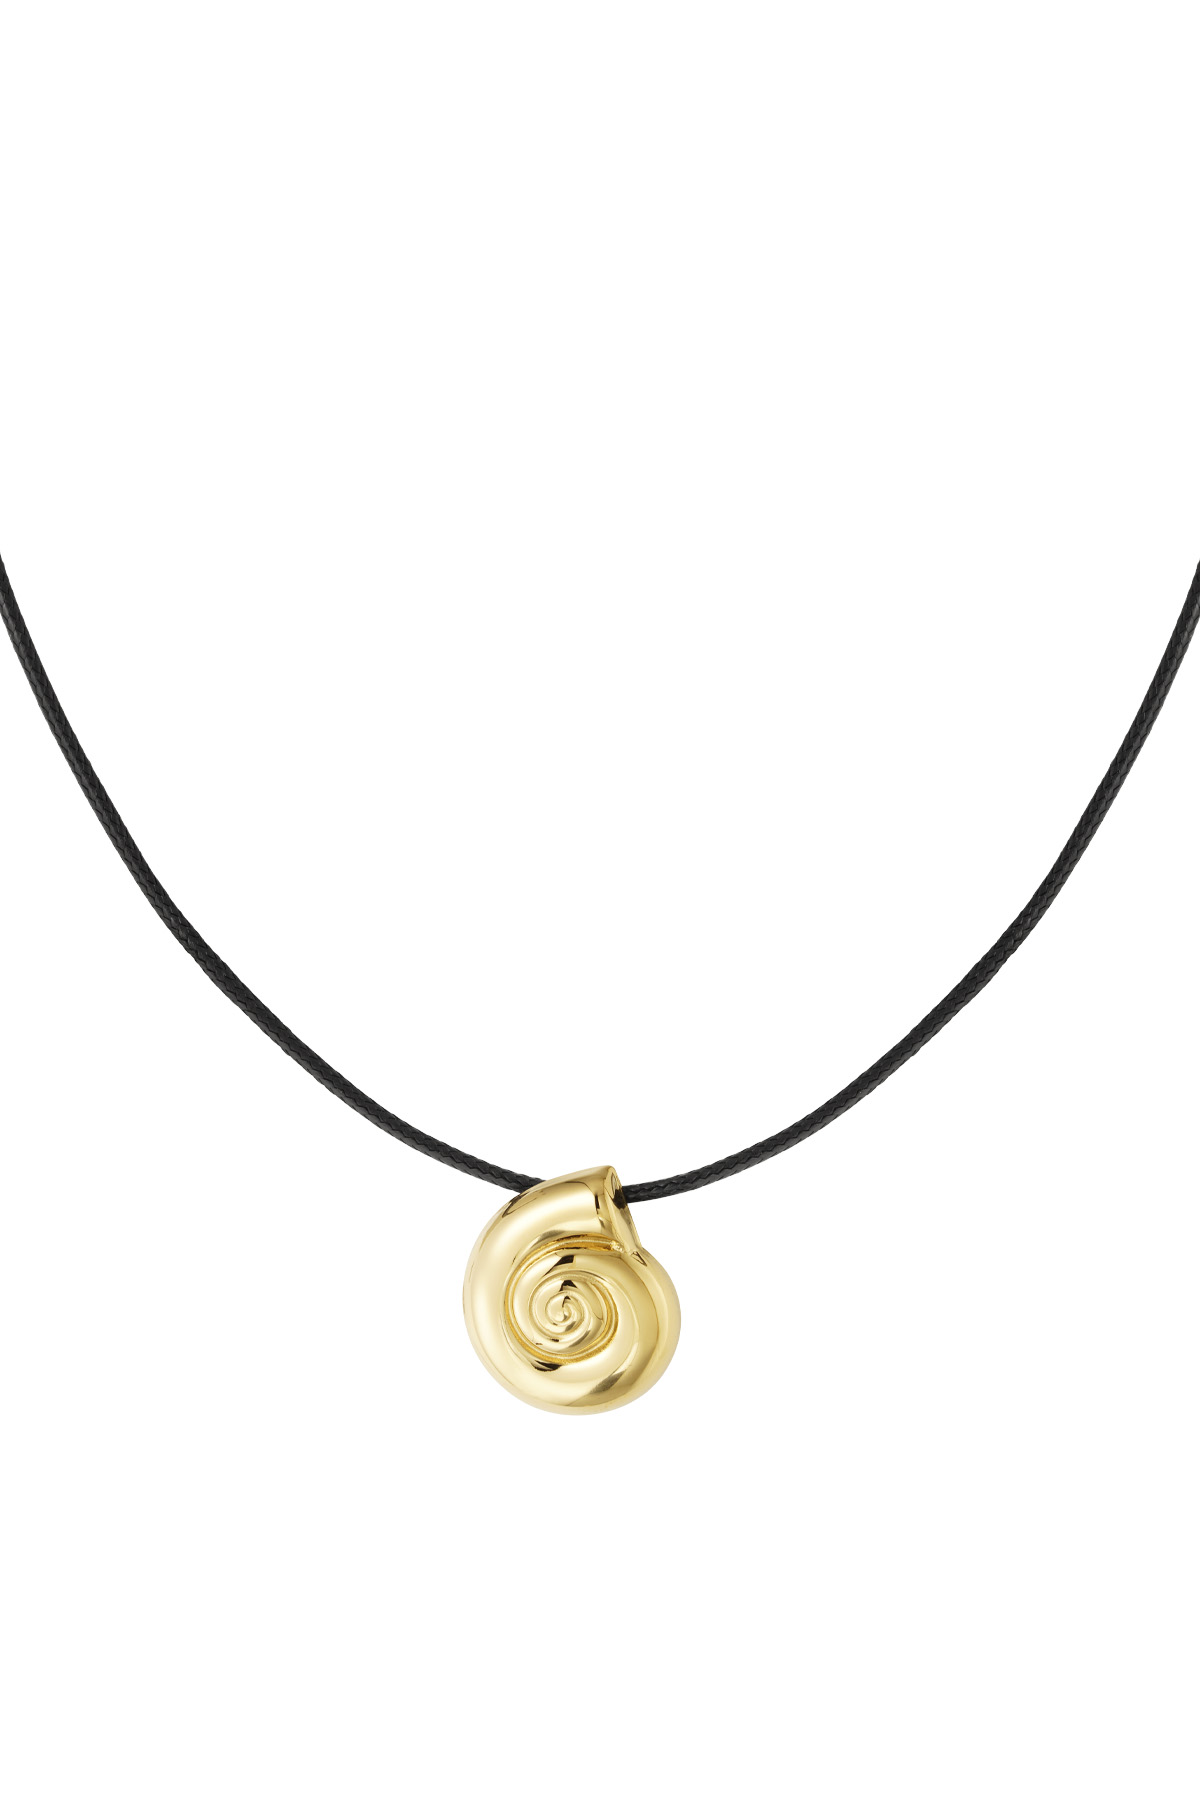 Shell vibe necklace - gold h5 